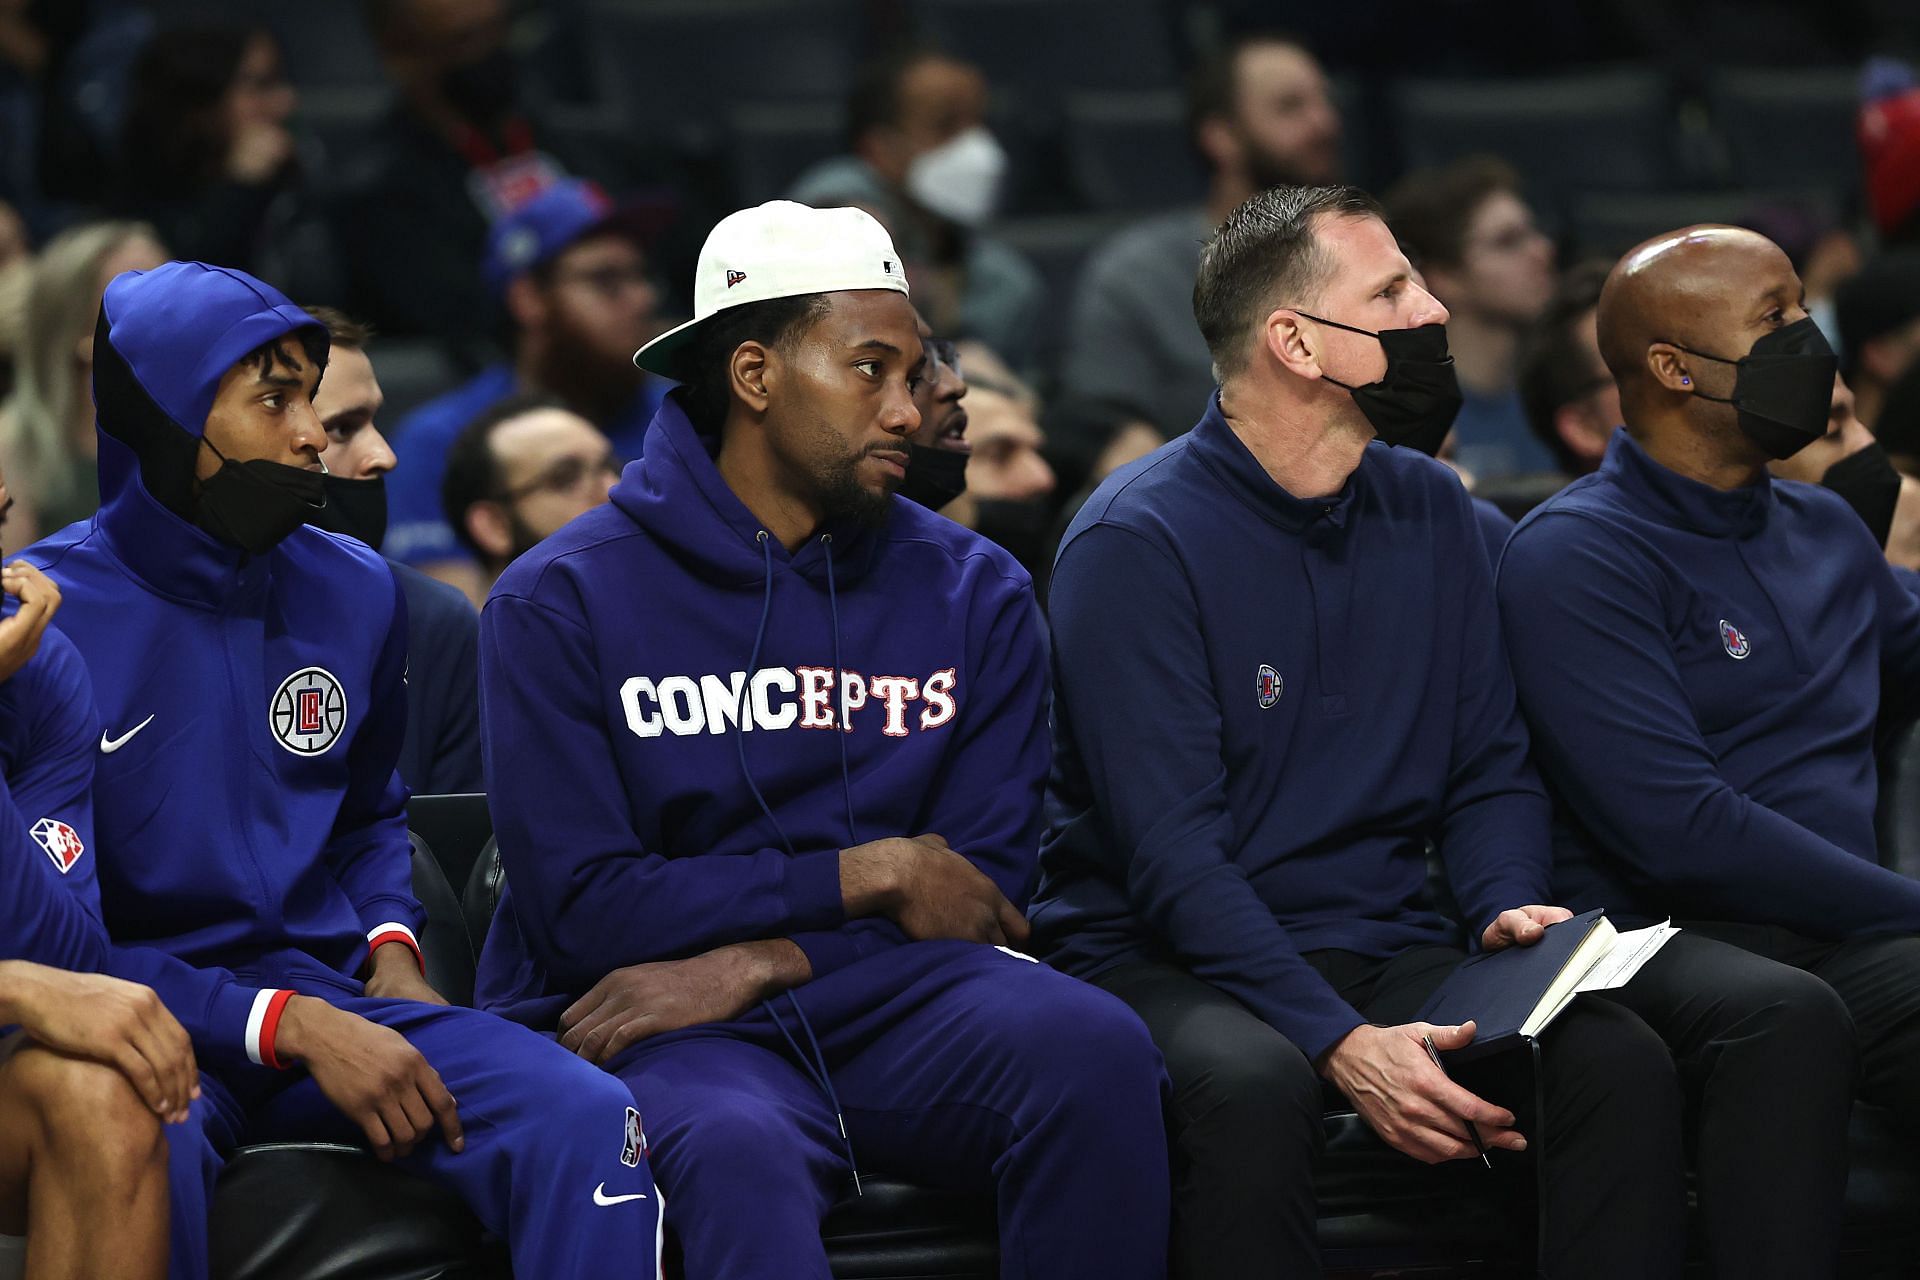 NBA Rumors: LA Clippers make half of roster available for trade, ready to  miss playoffs and regroup next year, Kawhi Leonard and Paul George not  available